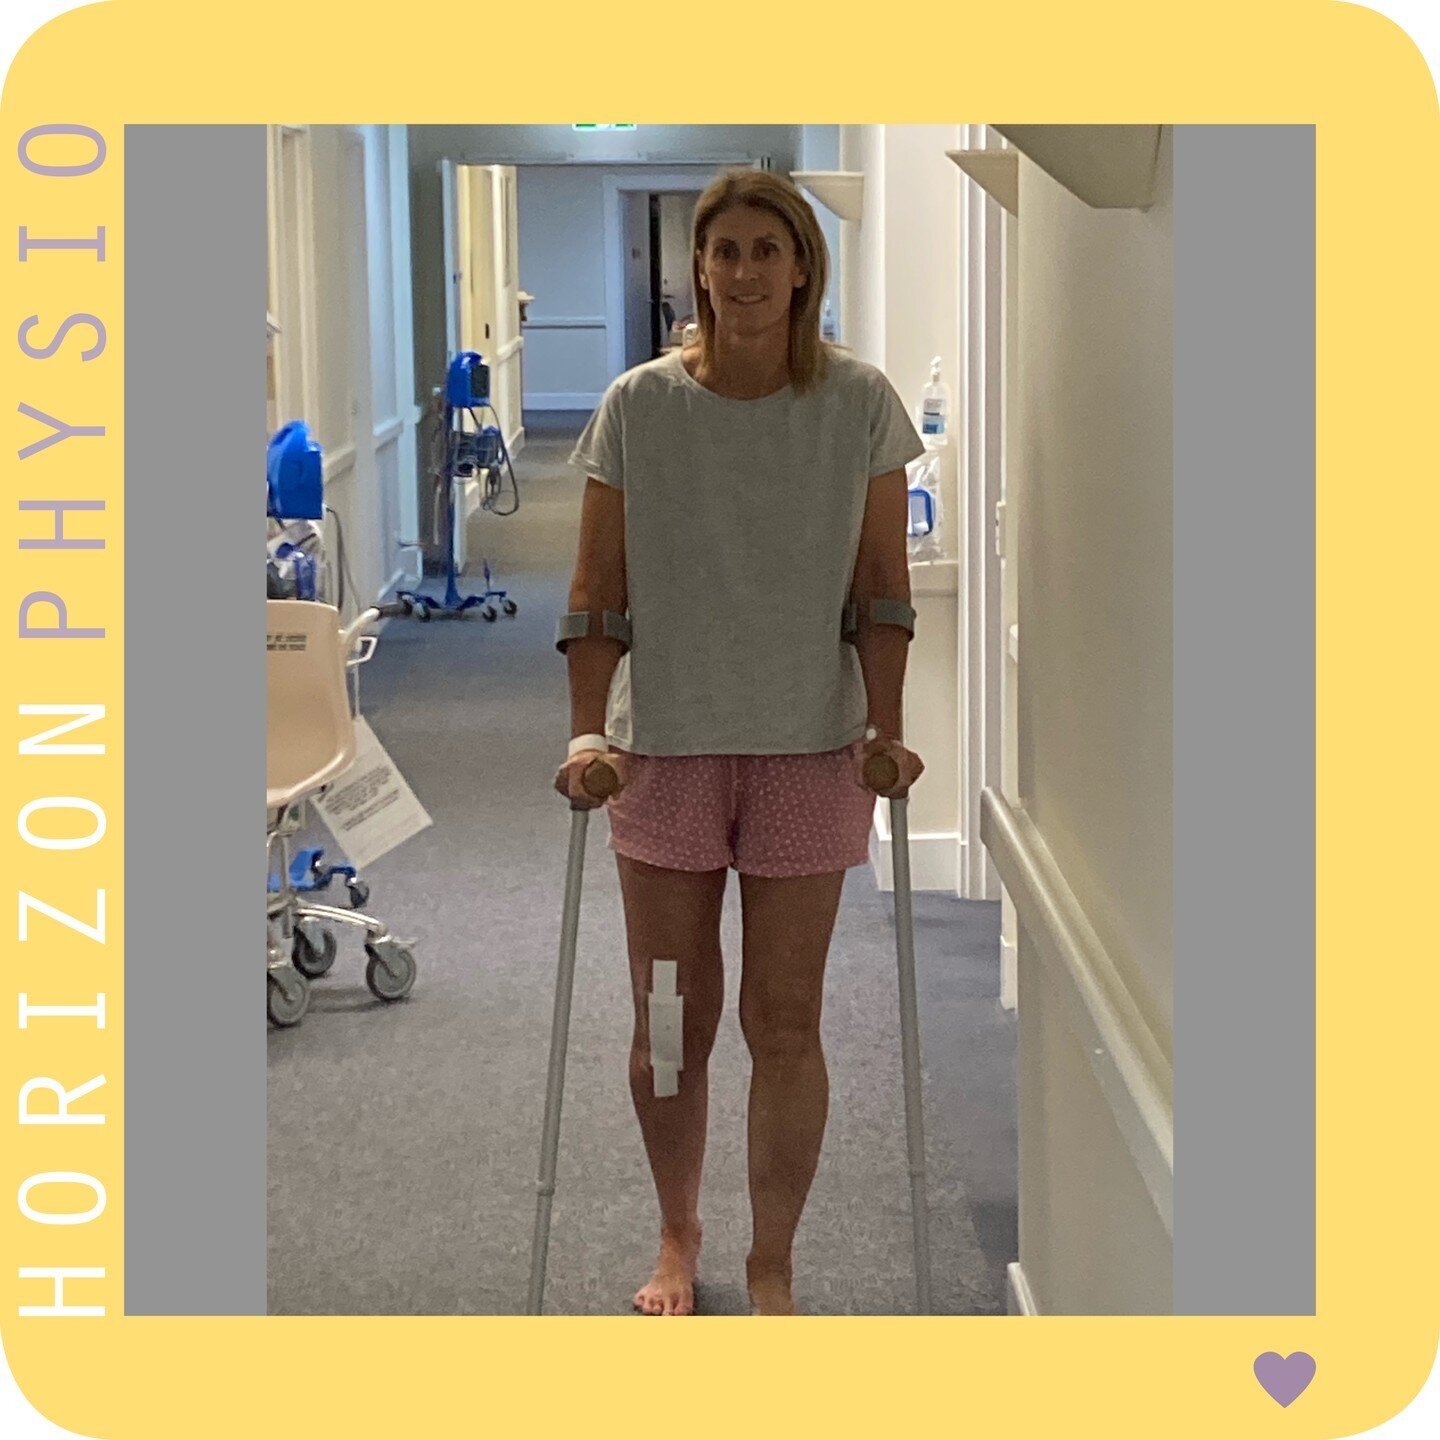 Super Shaz, from our fantastic Admin Team has had a Total Knee Replacement to address her severe right knee osteoarthritis. 

Shaz has offered to keep us updated over the period of her rehab to show whats involved and her progress. 

Today is post op